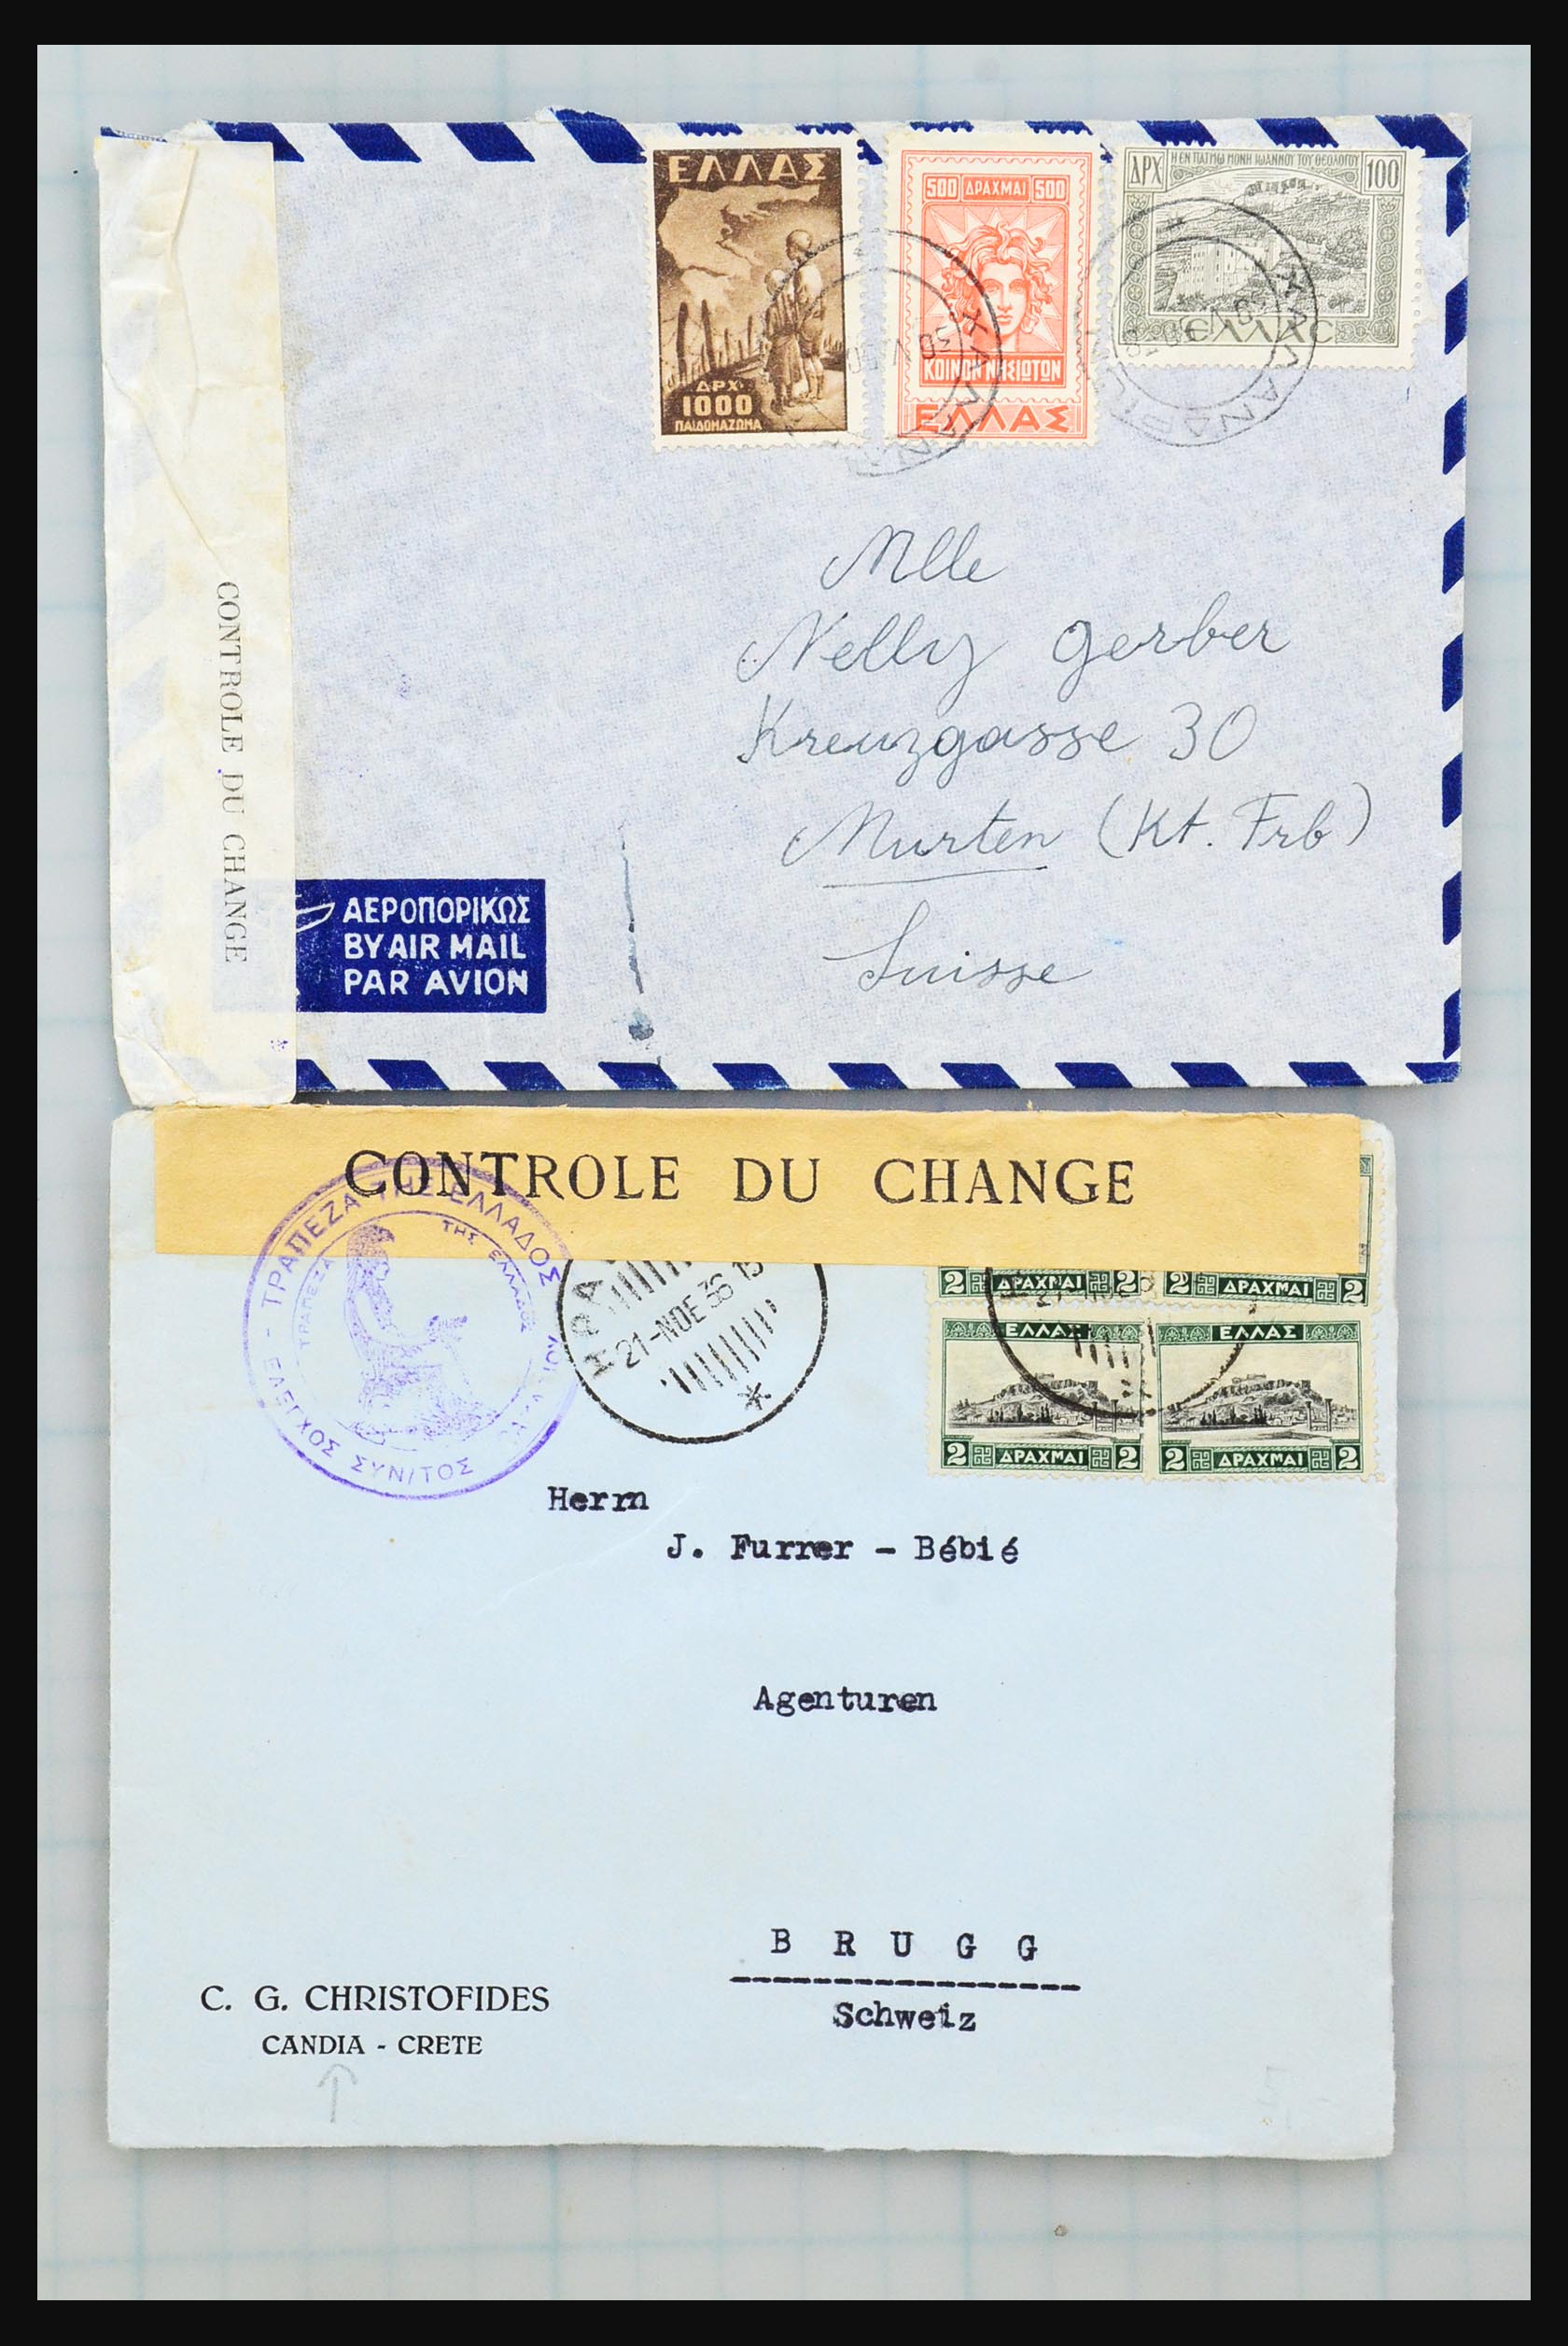 31358 034 - 31358 Portugal/Luxemburg/Greece covers 1880-1960.